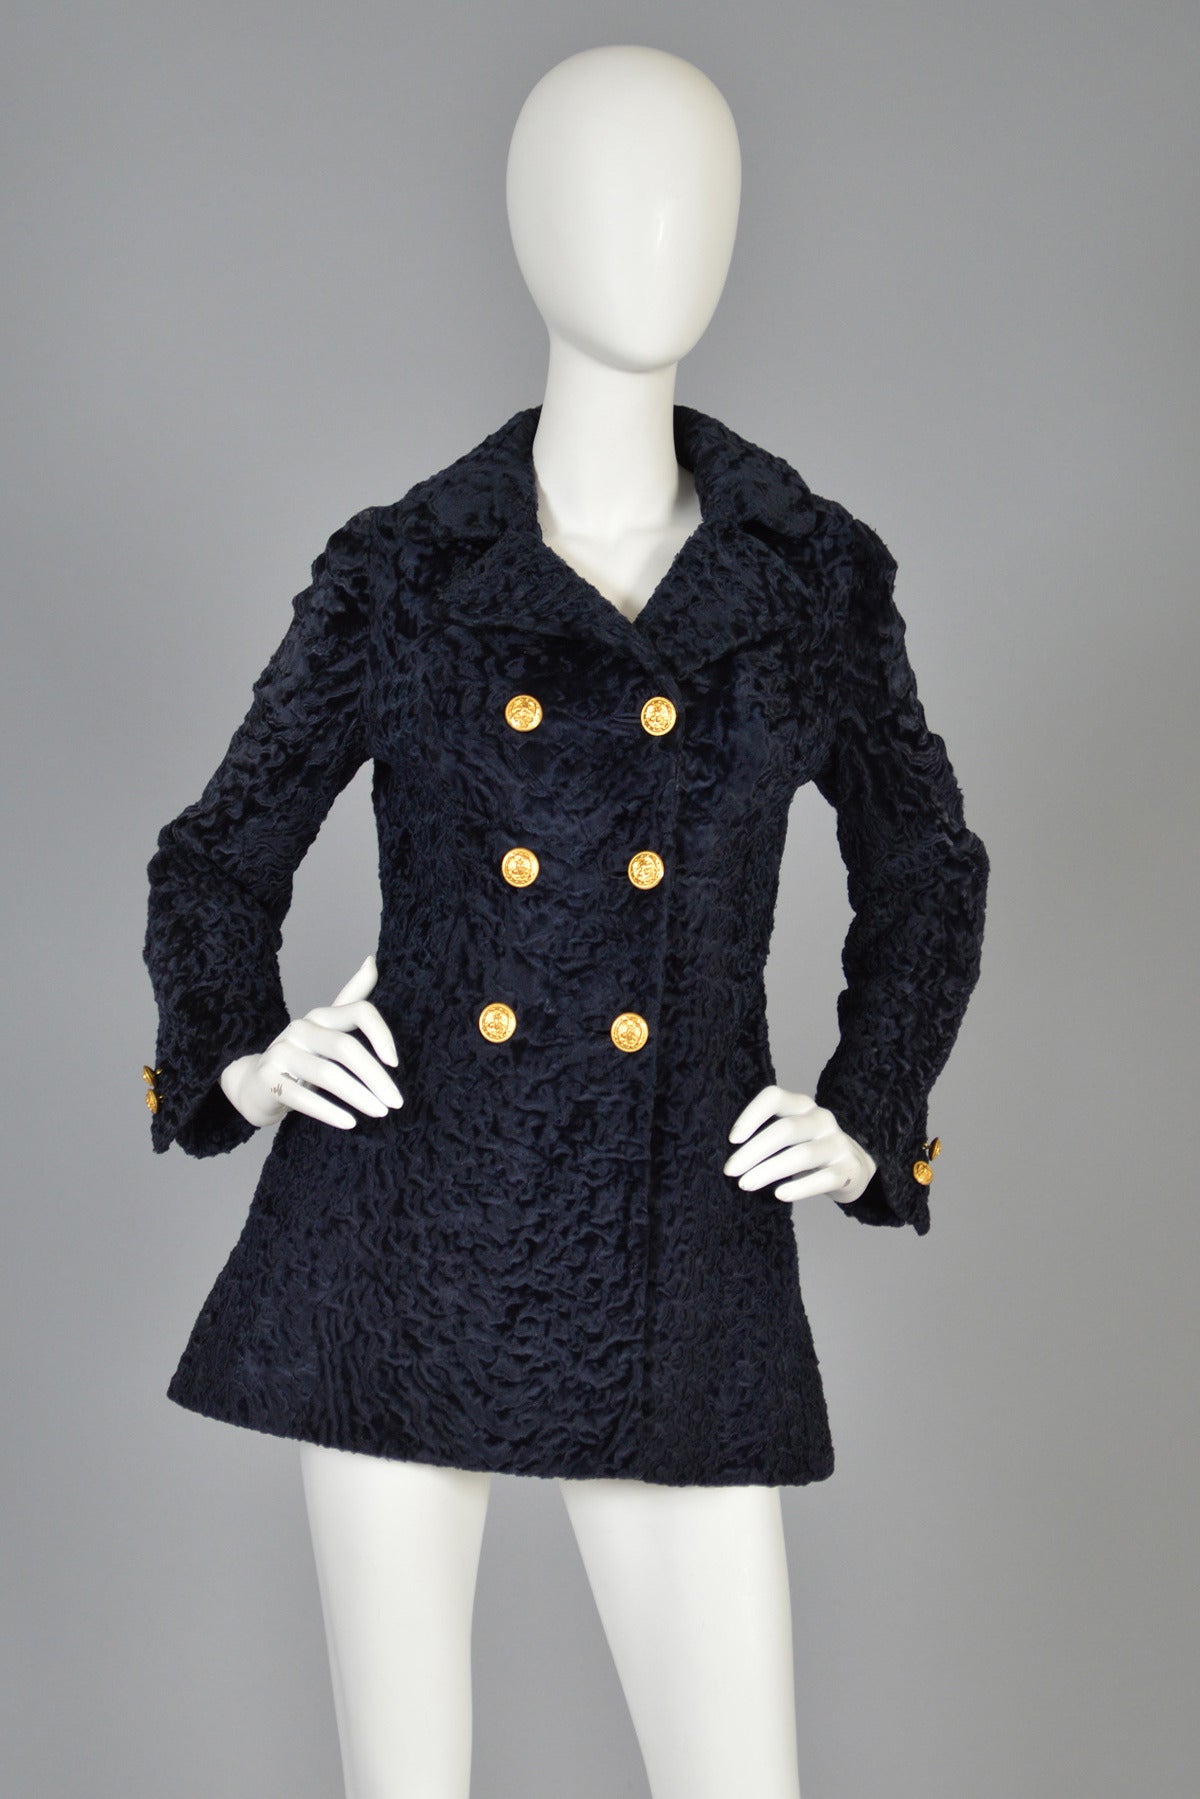 Lovely 1960s midnight blue genuine broadtail fur coat but the famed Reiss & Fabrizio. Reiss & Fabrizio were famed NYC furriers who did many fur pieces for both Hollywood and Broadway - including Bab's iconic Jaguar suit in 1964's Funny Girl. 